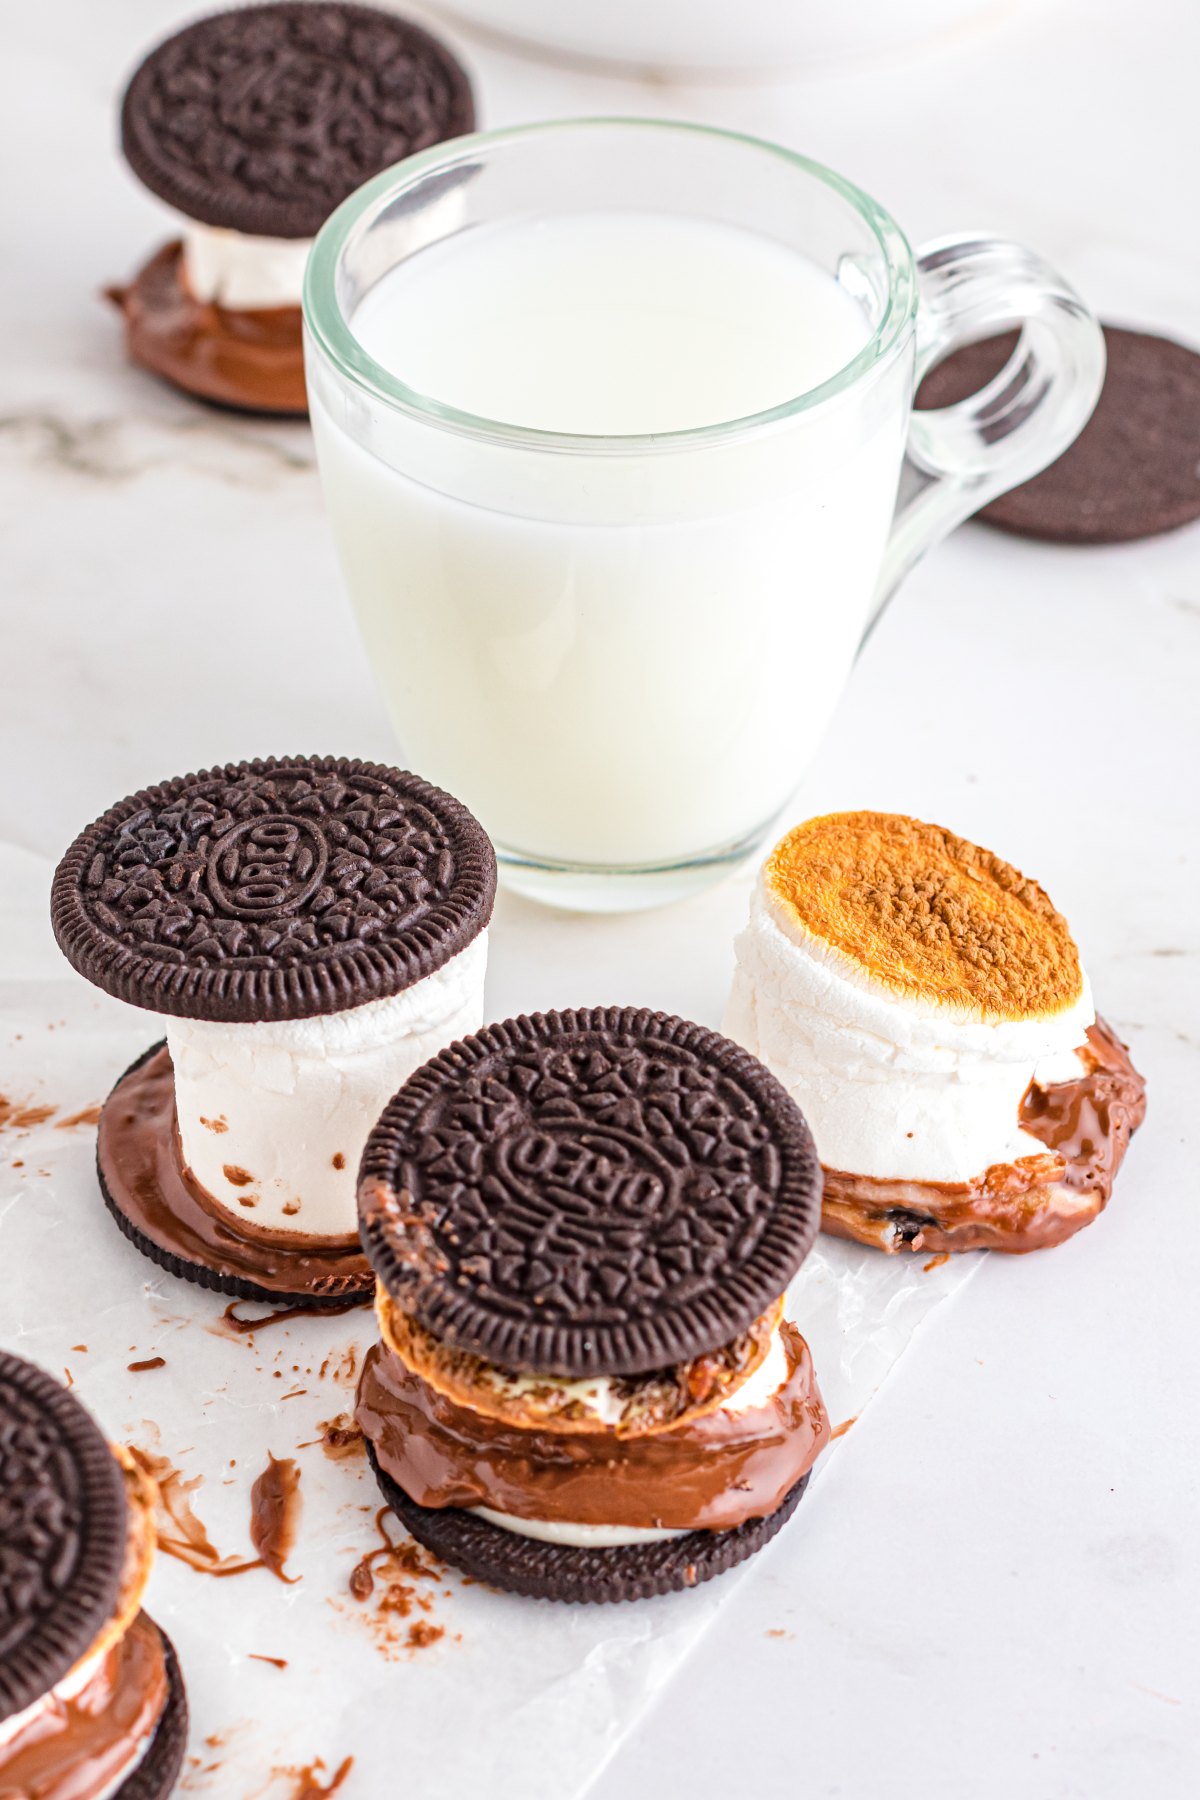 Oreo S'mores with milk